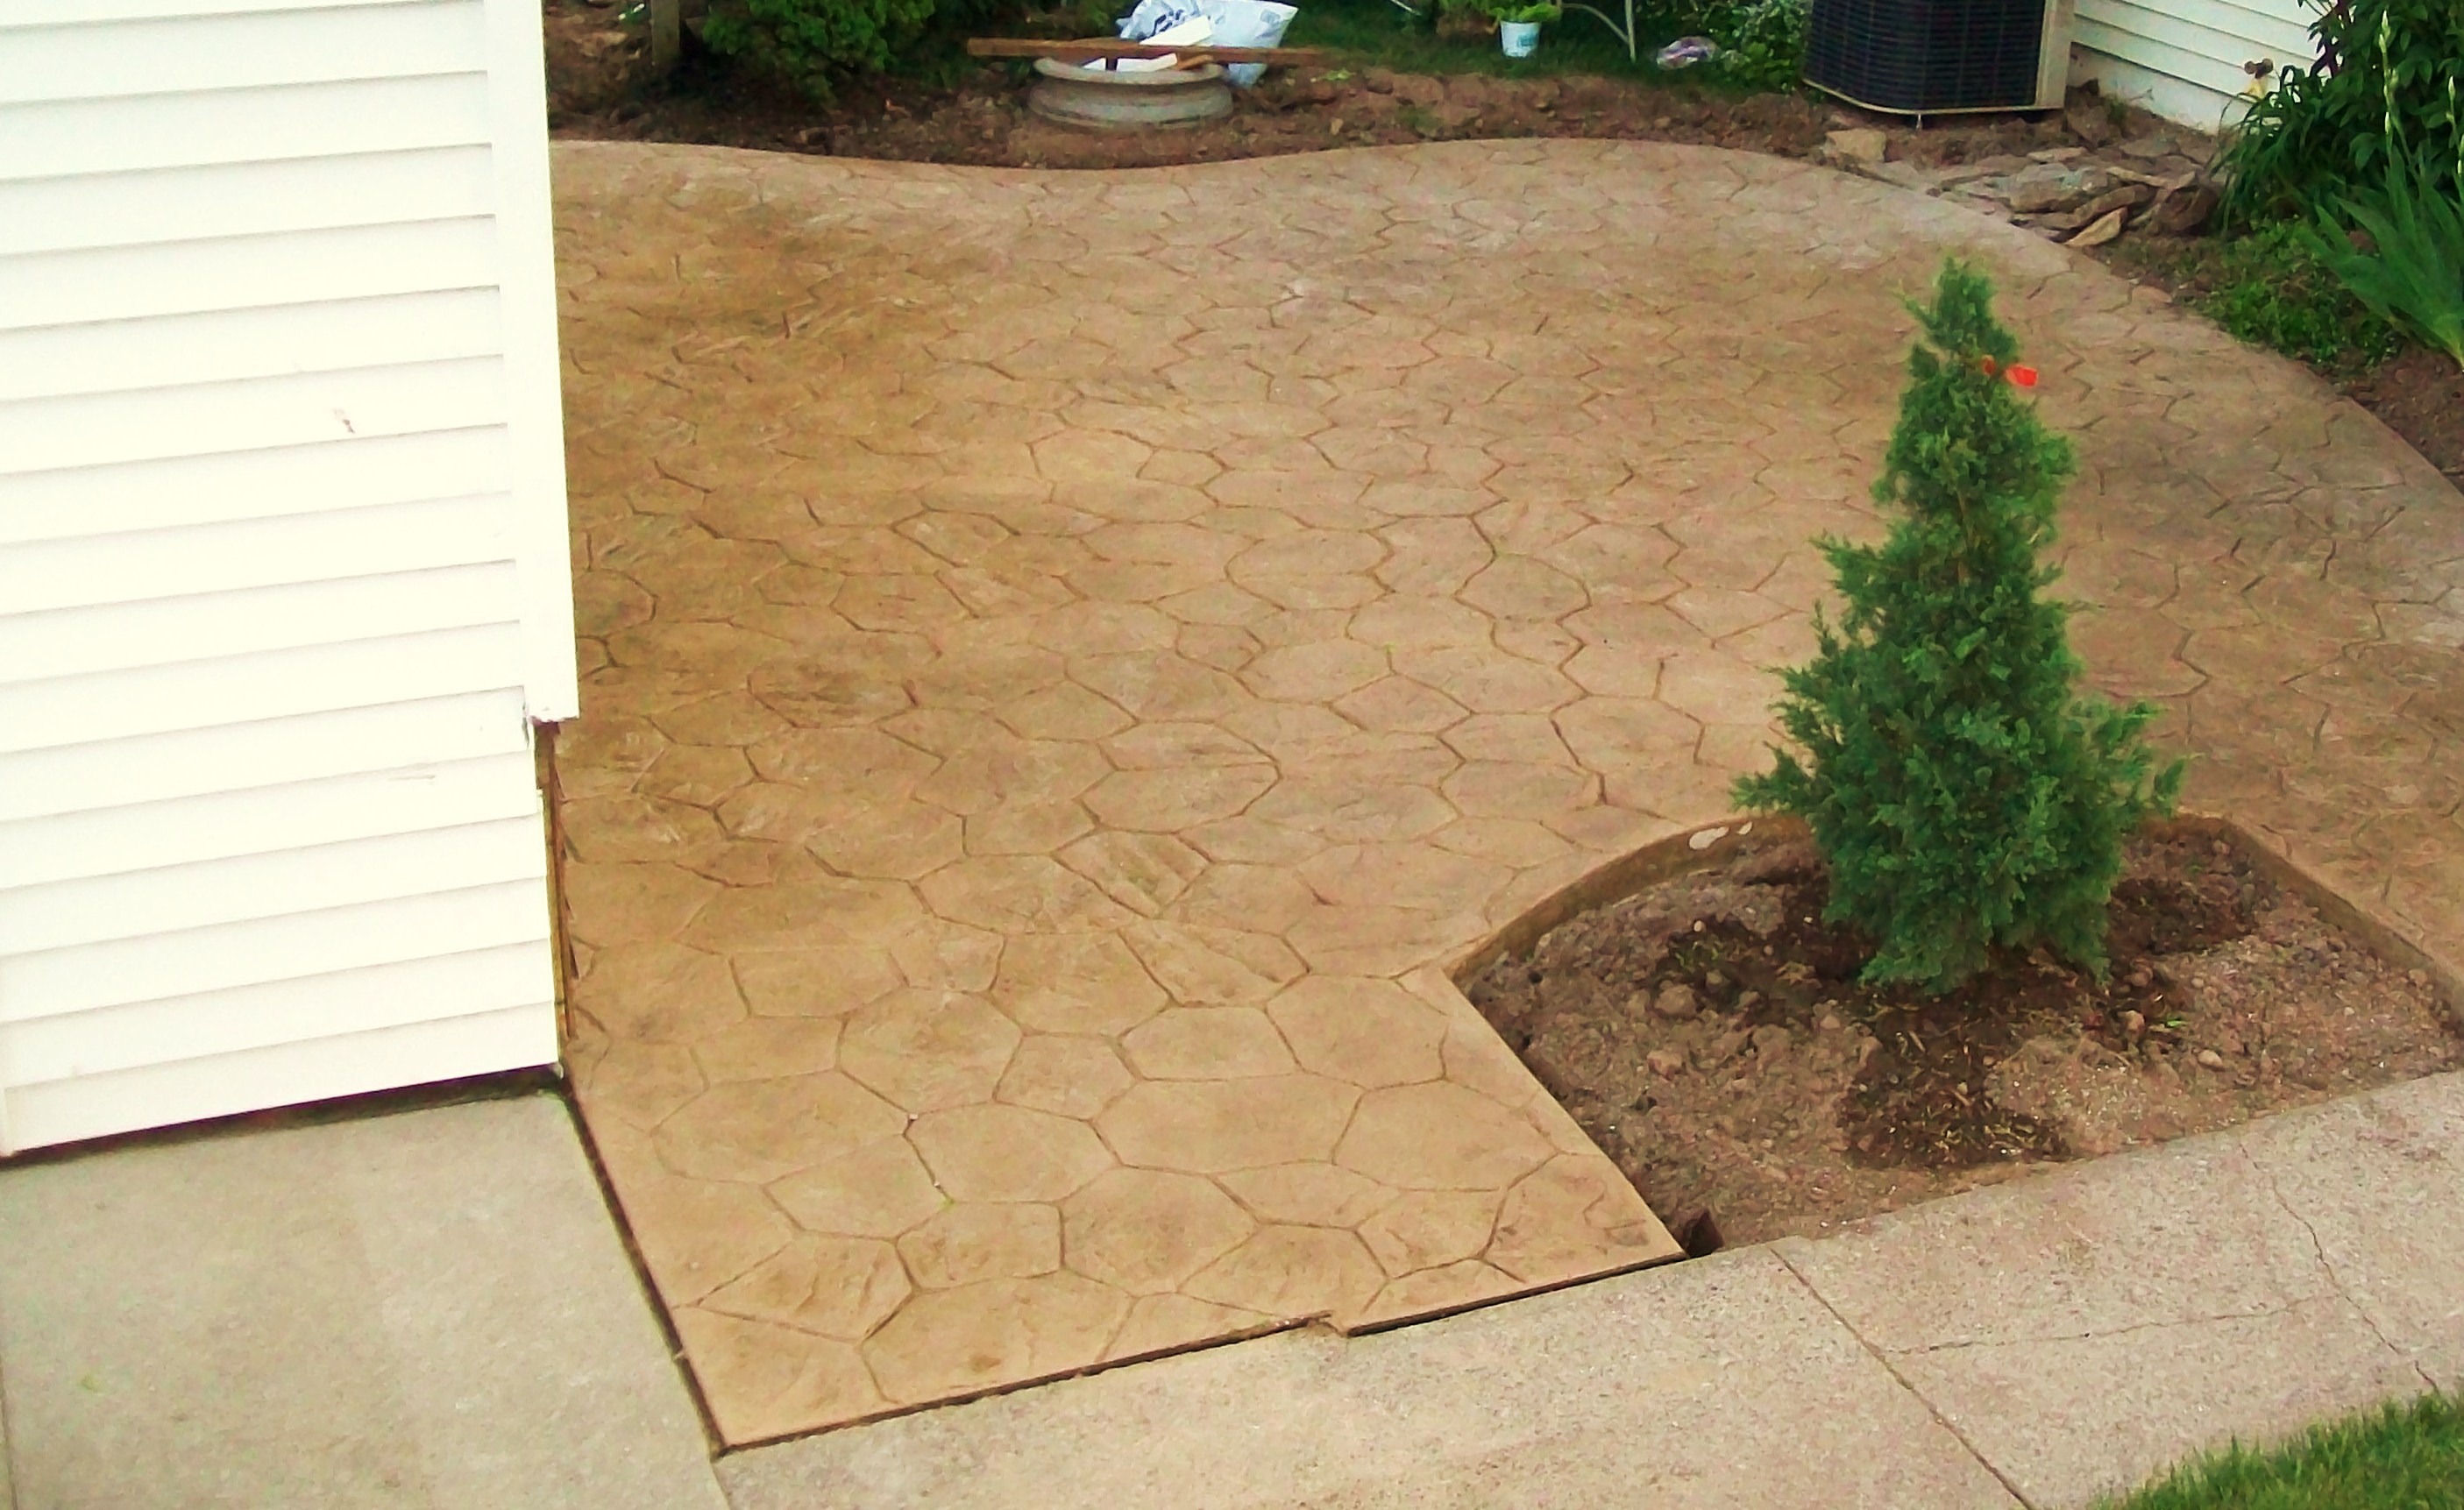 50 Best Of Stamped Concrete Patios Images Outdoor Patio Blog